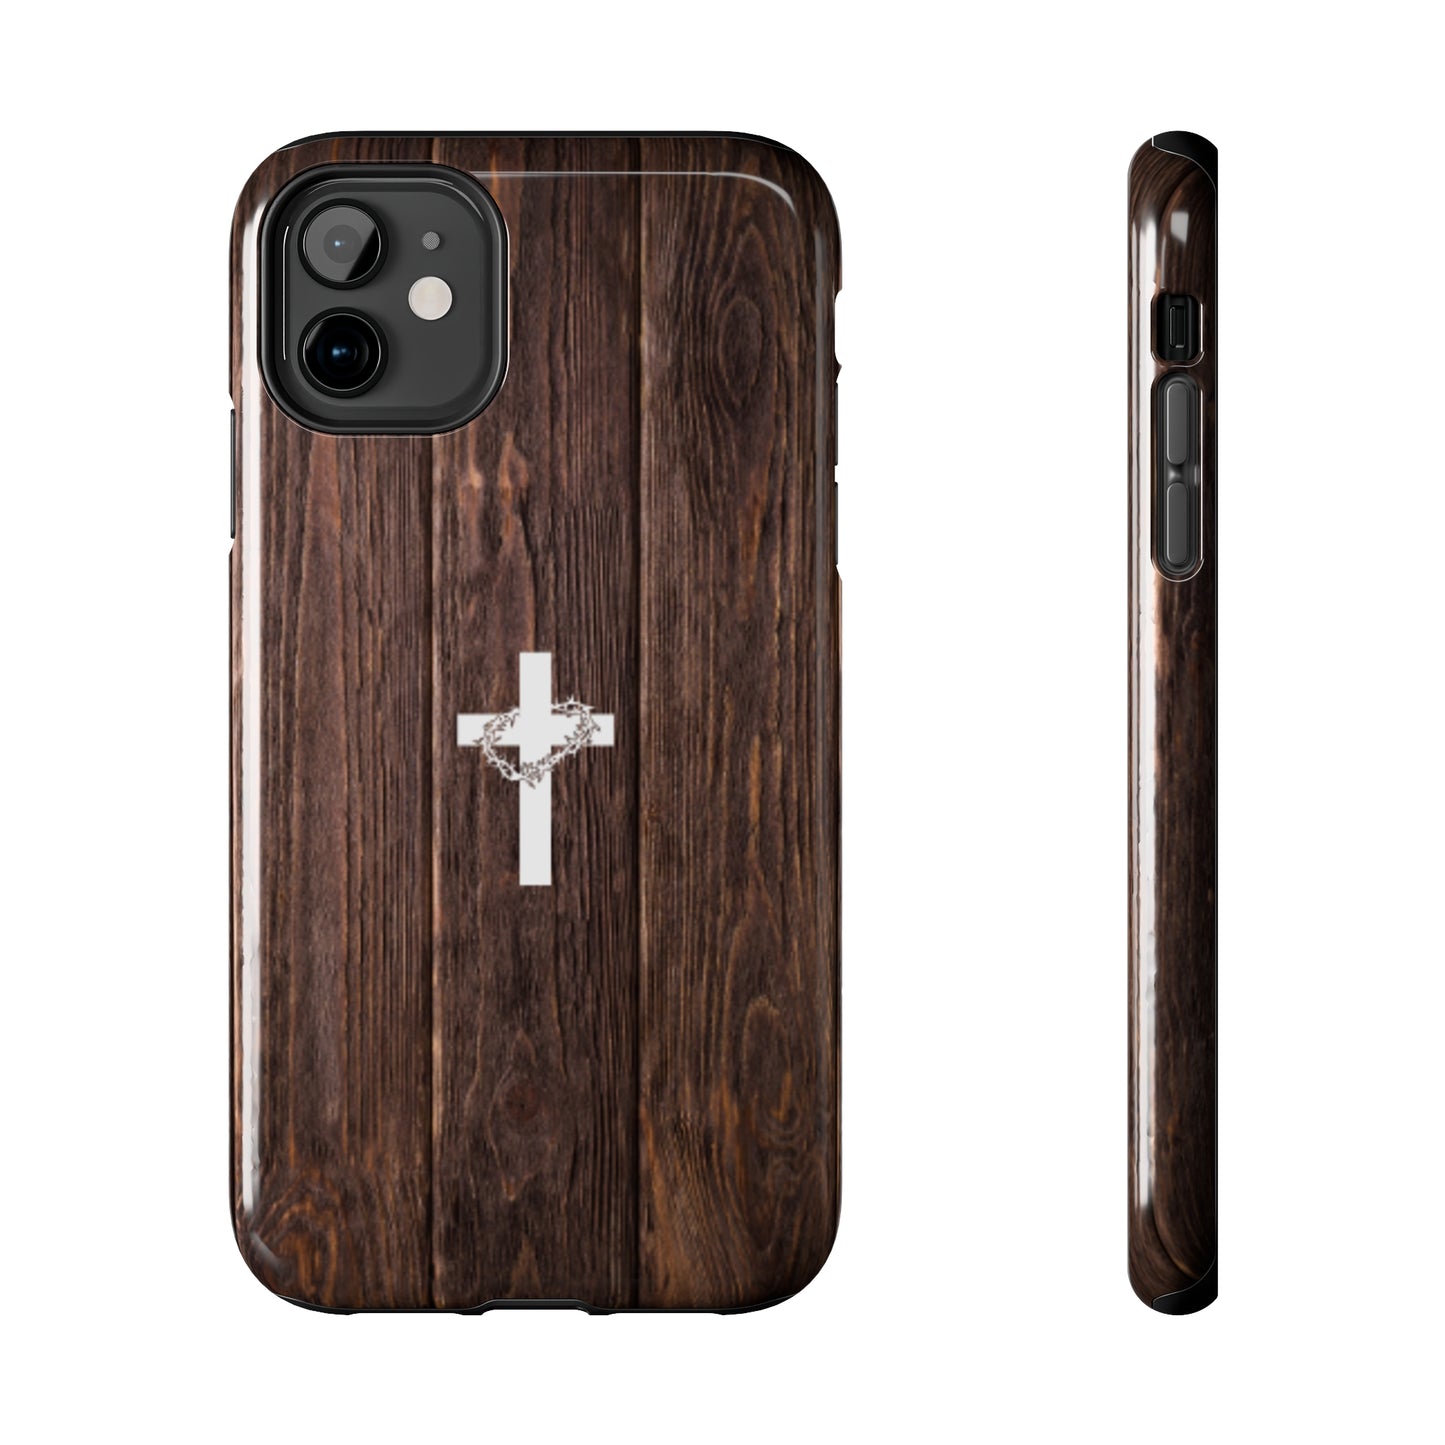 The Love of Jesus Wooden iPhone Case